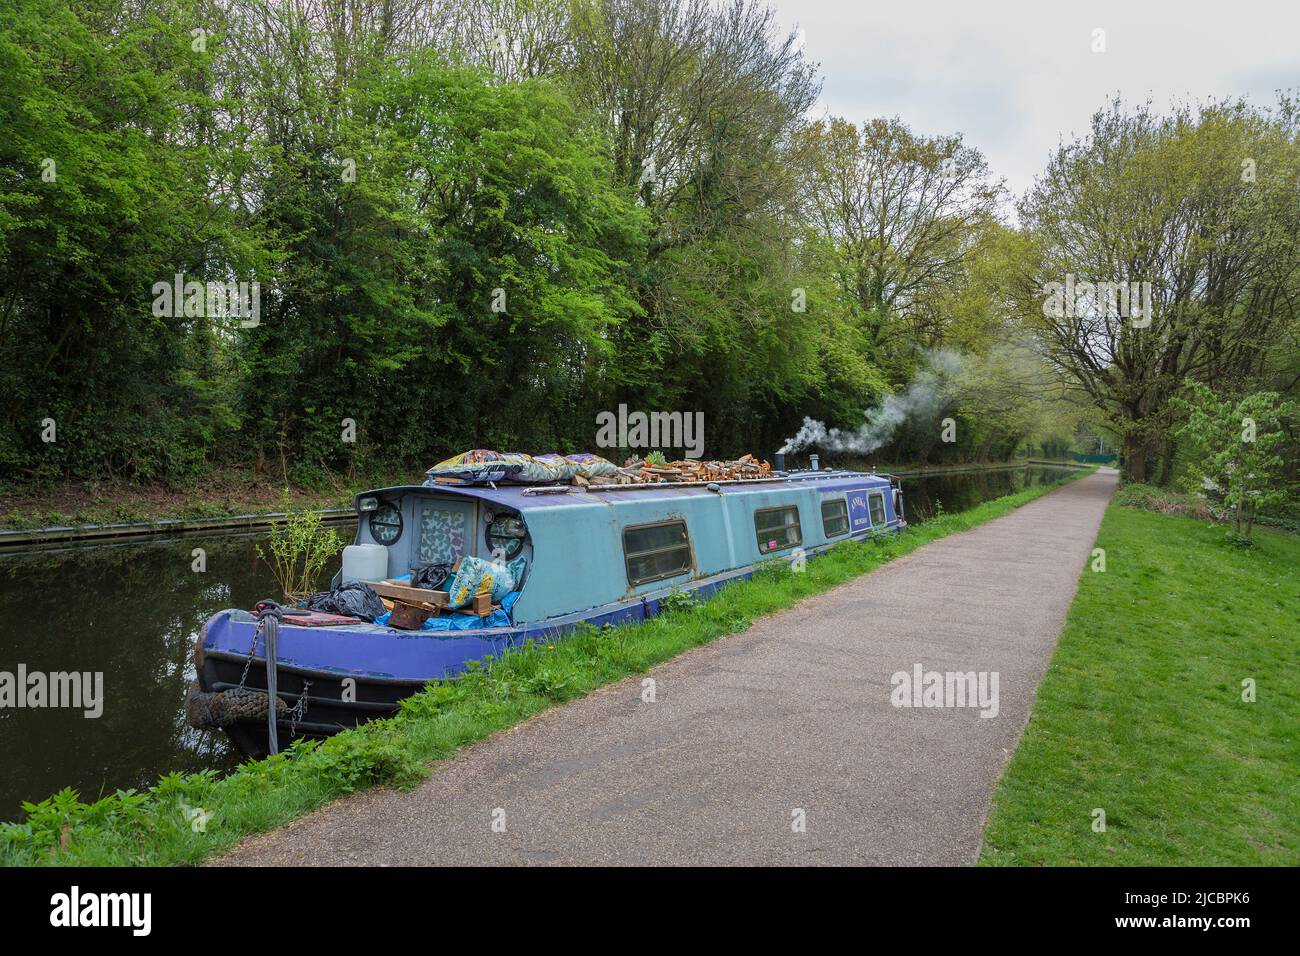 A houseboat or narrow boat moored on a canal with smoke coming from the chimney of a log burning stove. Alternative lifestyle or holiday concept. Stock Photo